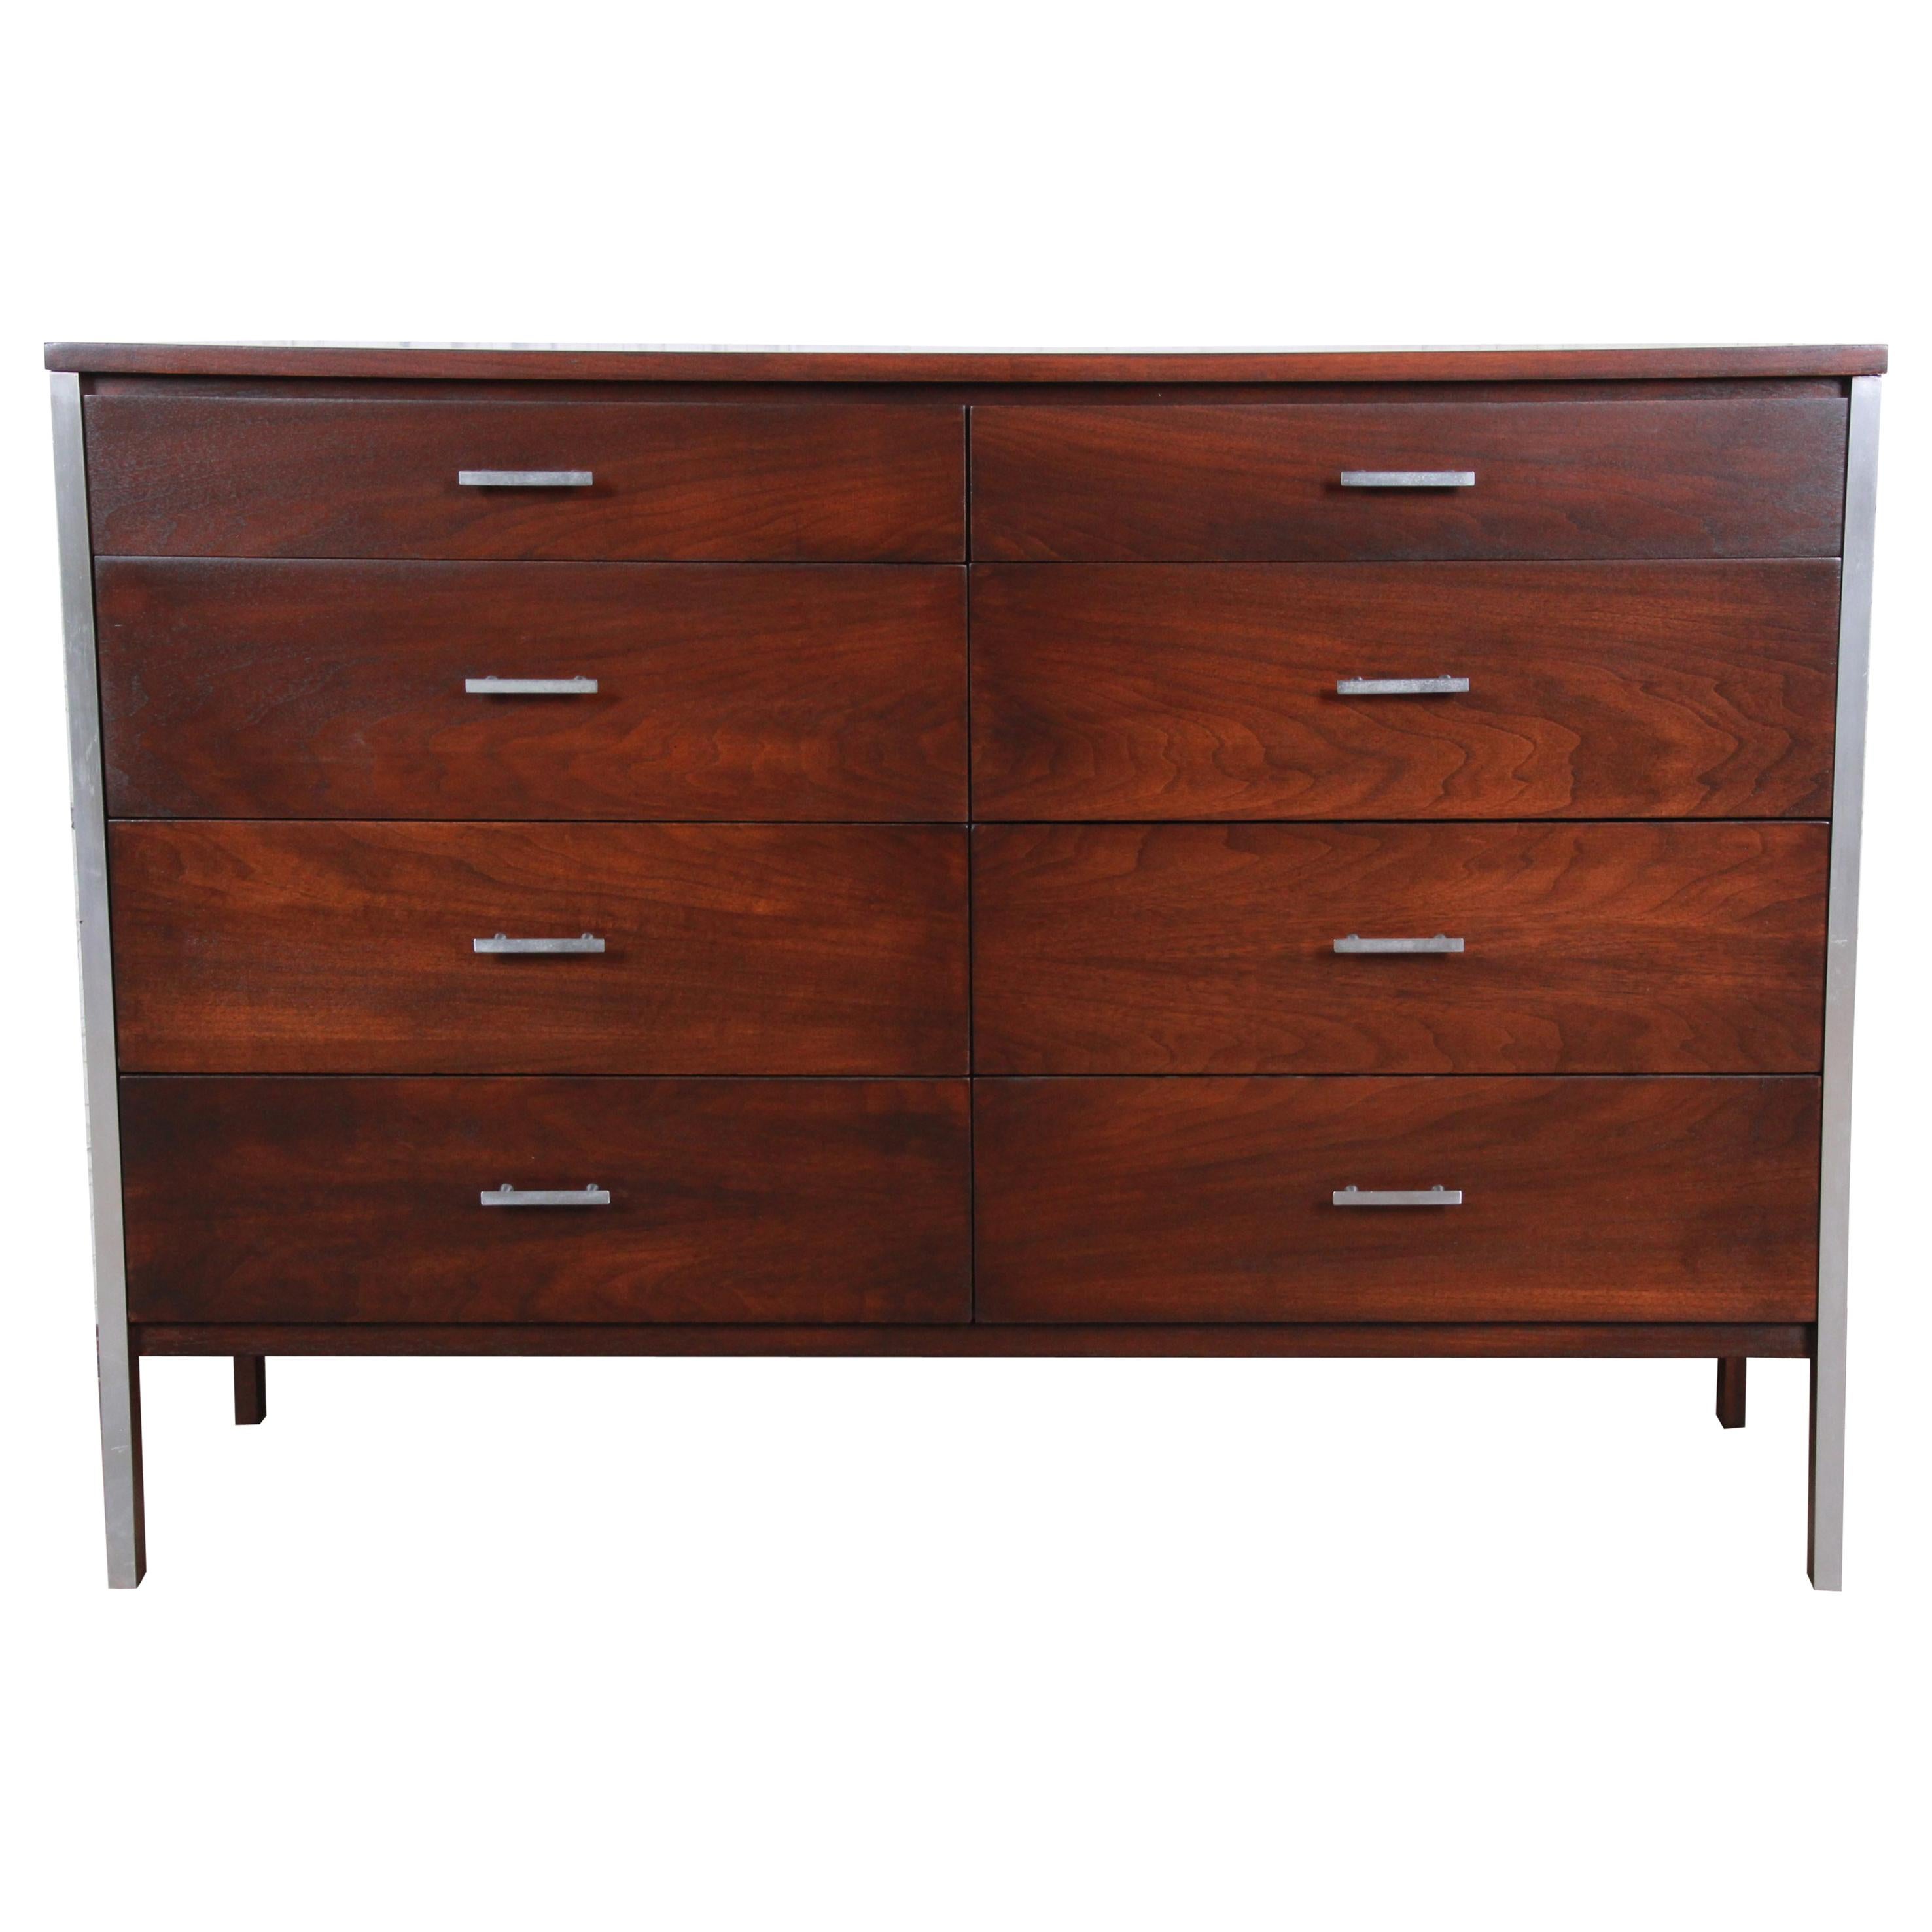 Paul McCobb for Calvin Linear Group Long Dresser or Credenza, Newly Refinished